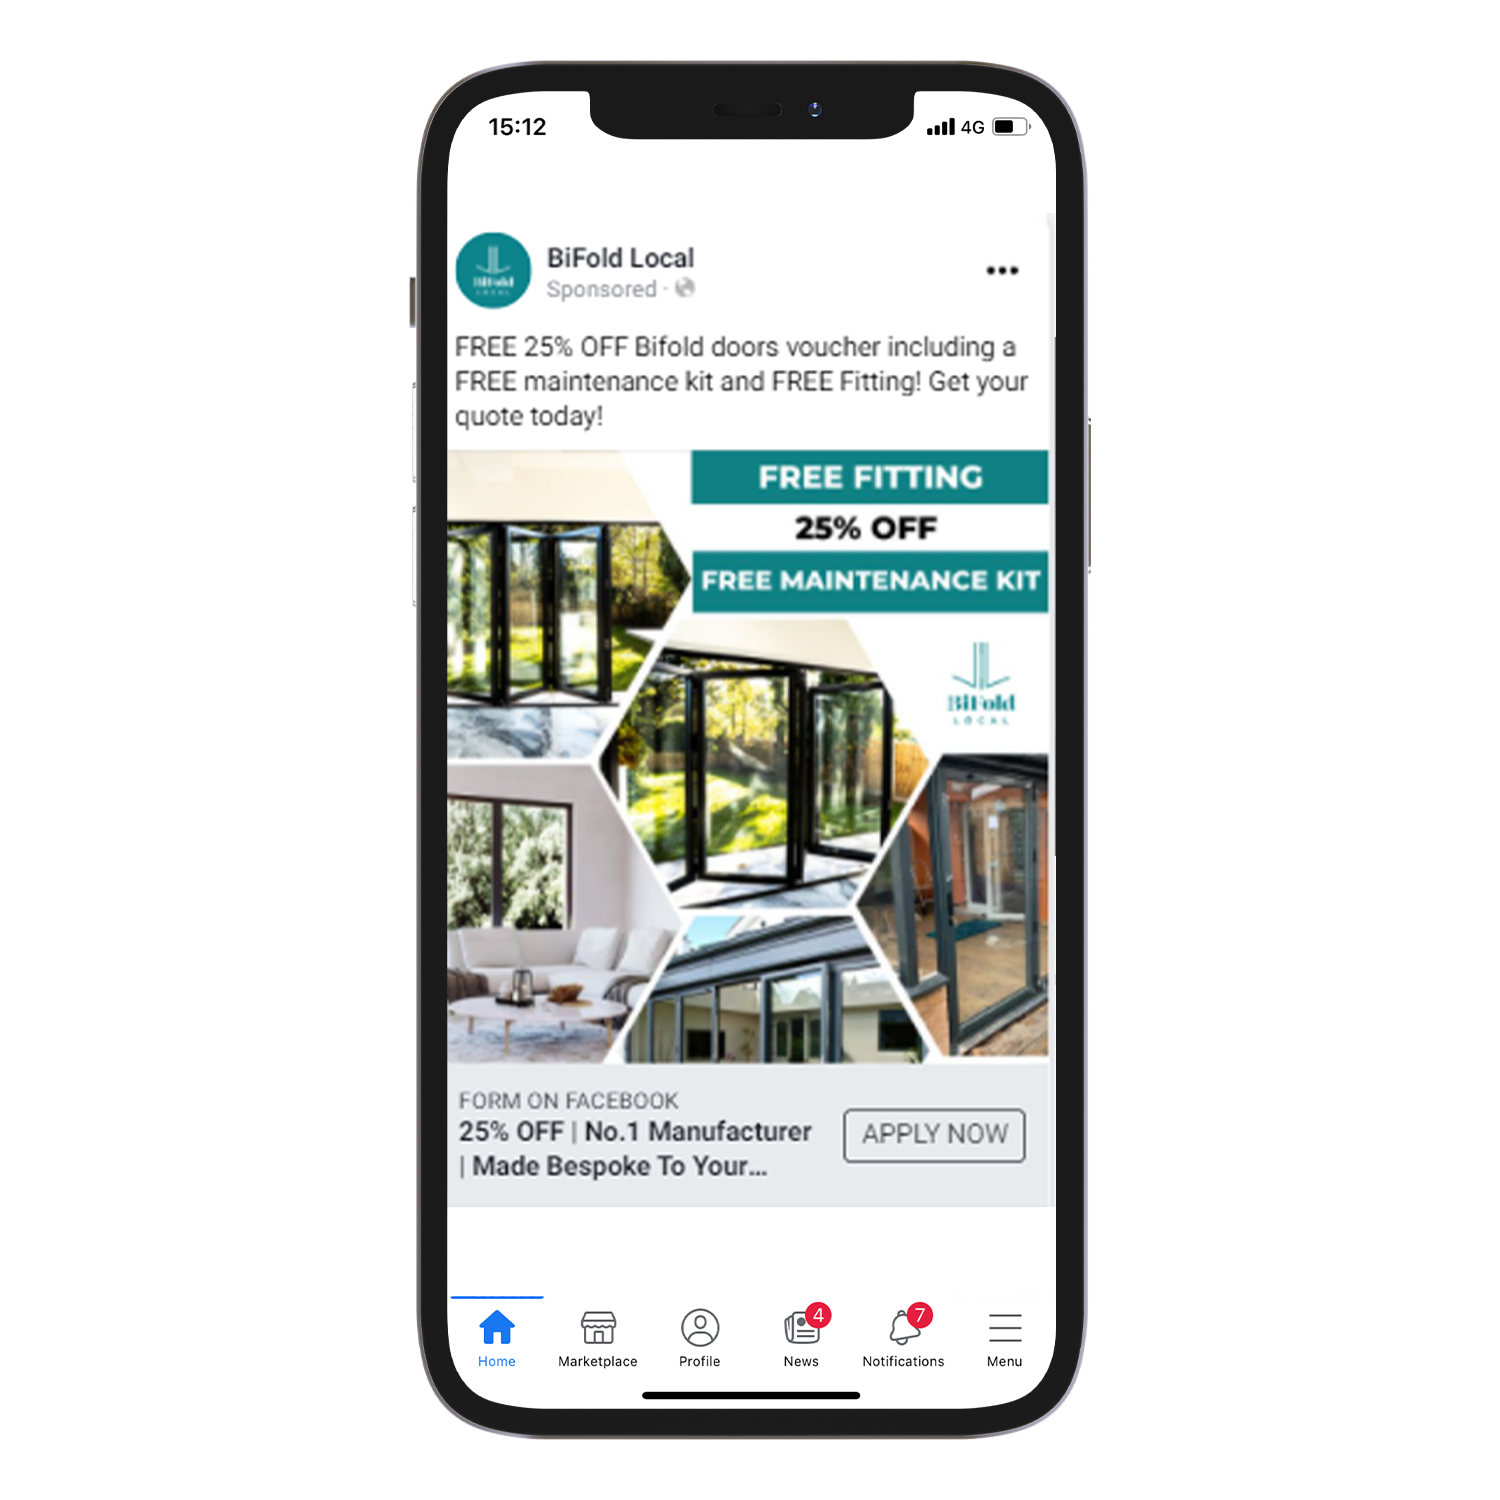 Mockup of an iphone screen with a BiFold Local social ads showing on the Facebook app